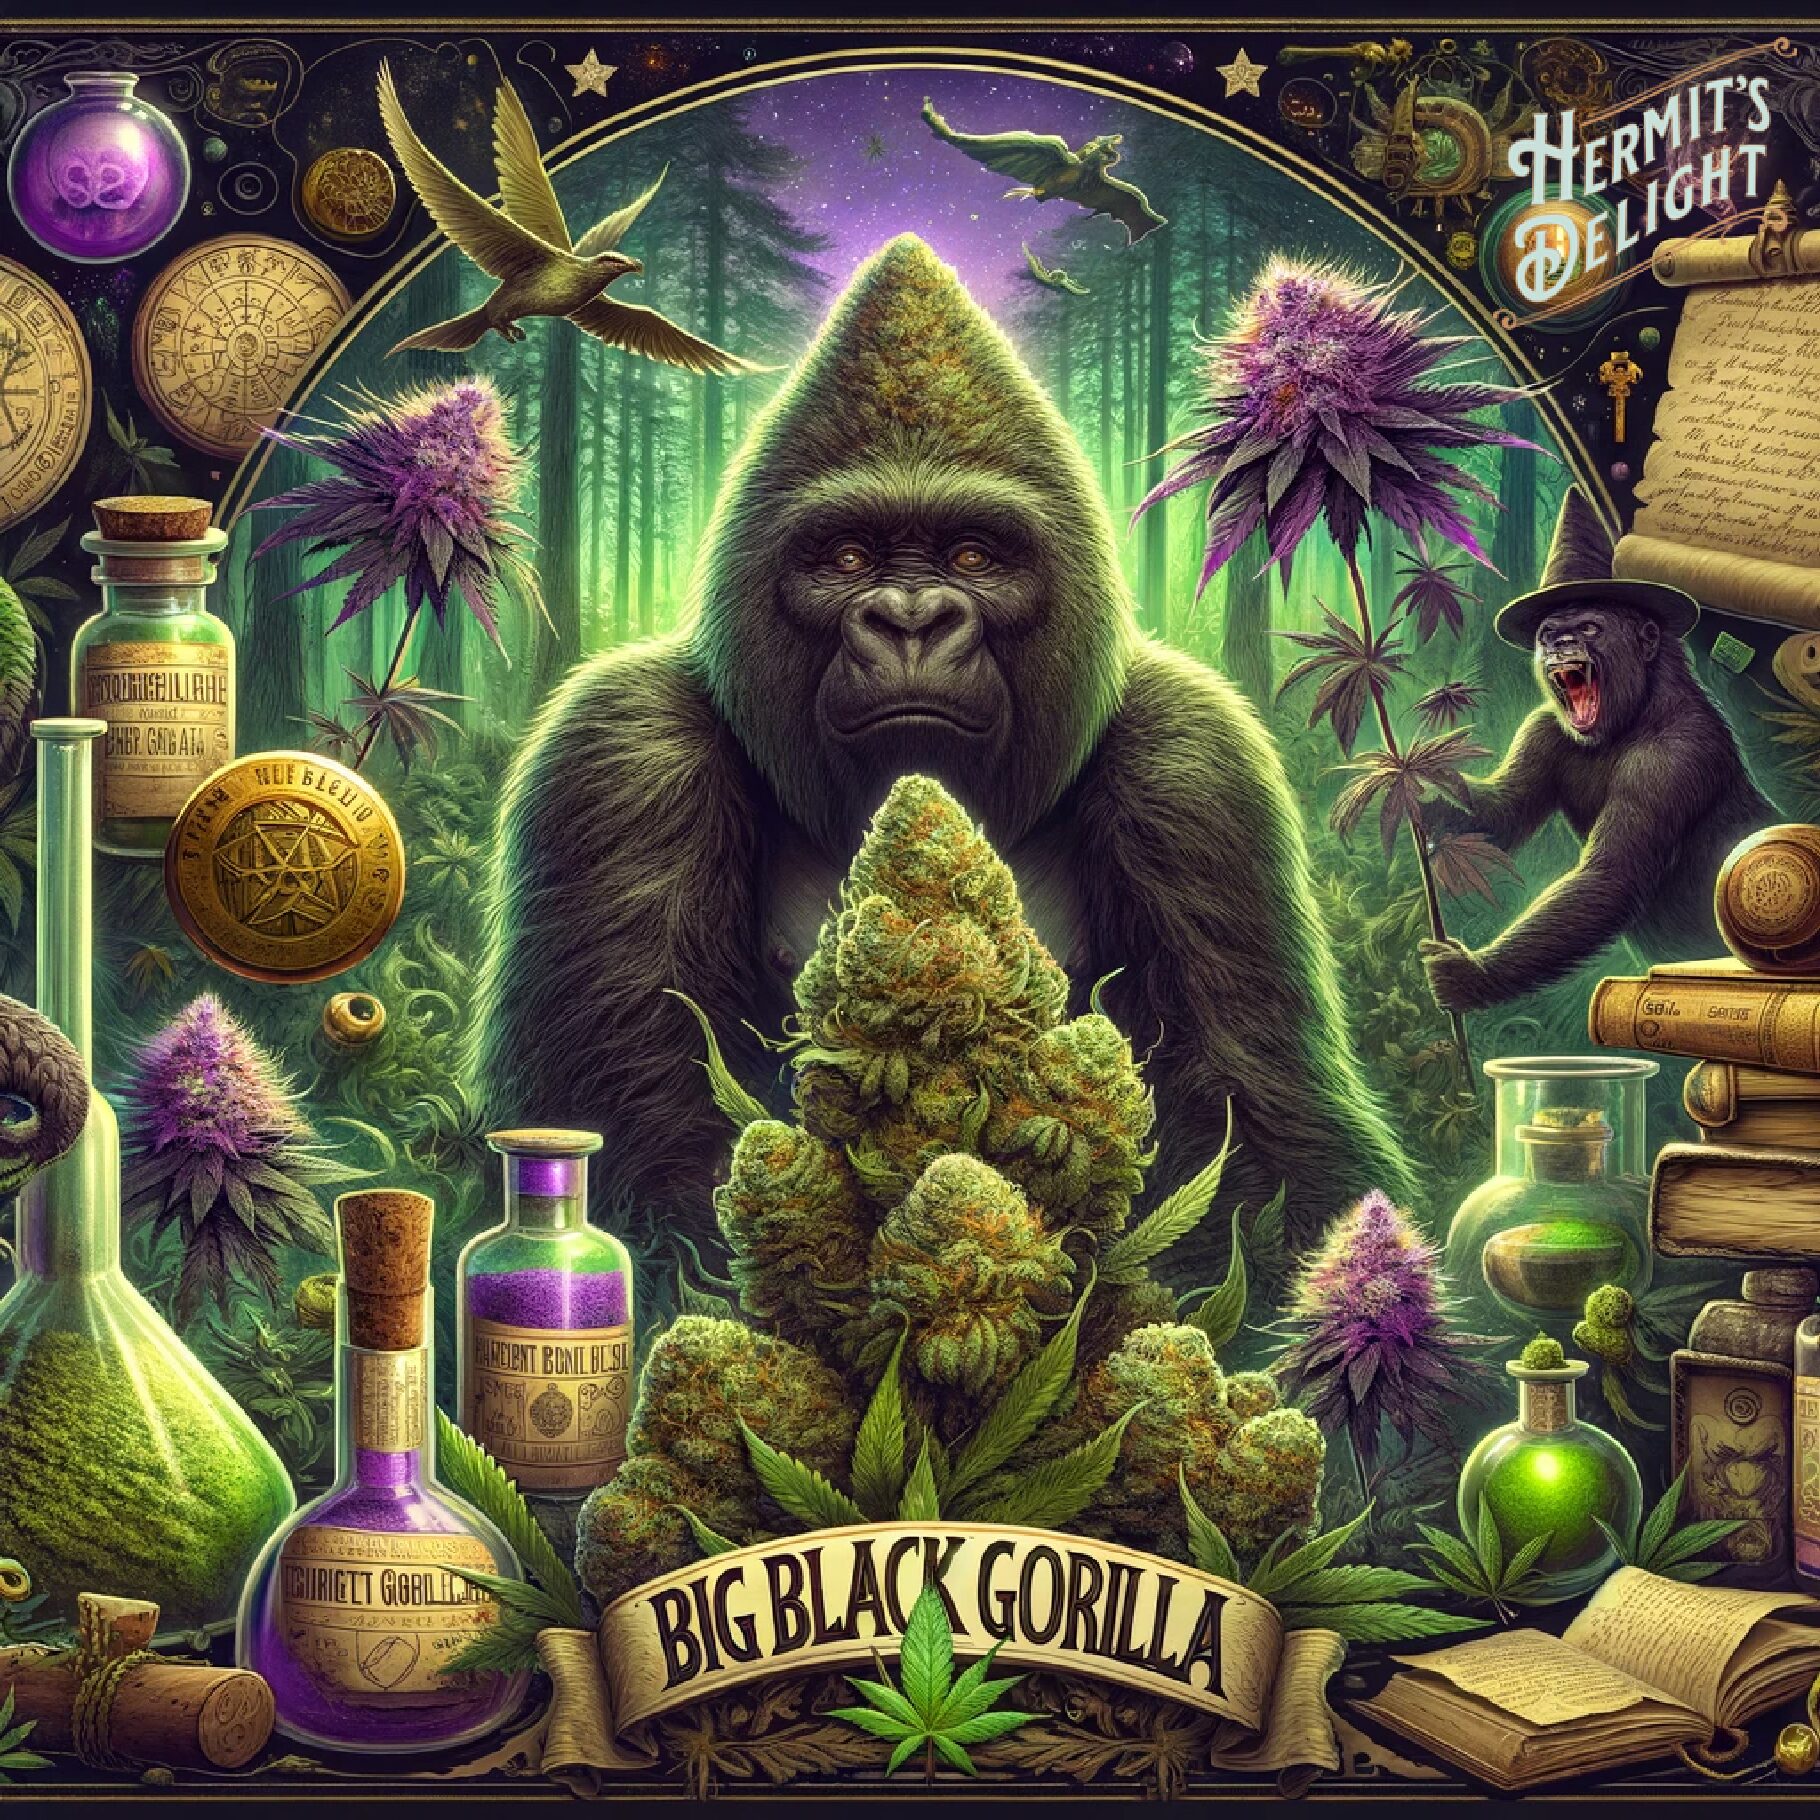 Big Black Gorilla, cultivated in the deepest shadows of Hermit's Delight's mystical forests, is a formidable strain, embodying the strength and mystery of the forest's most majestic protector. This powerful indica-dominant hybrid combines a profound sense of relaxation with an air of enigma, much like encountering a gentle giant in the heart of the woods.

With its dense, resinous buds and earthy, musky aroma tinged with a hint of wild berries, Big Black Gorilla is like a whispered legend come to life. It offers a tranquil yet intense journey, drawing you deeper into the ancient tales and secrets of Hermit's Delight's hidden groves.
